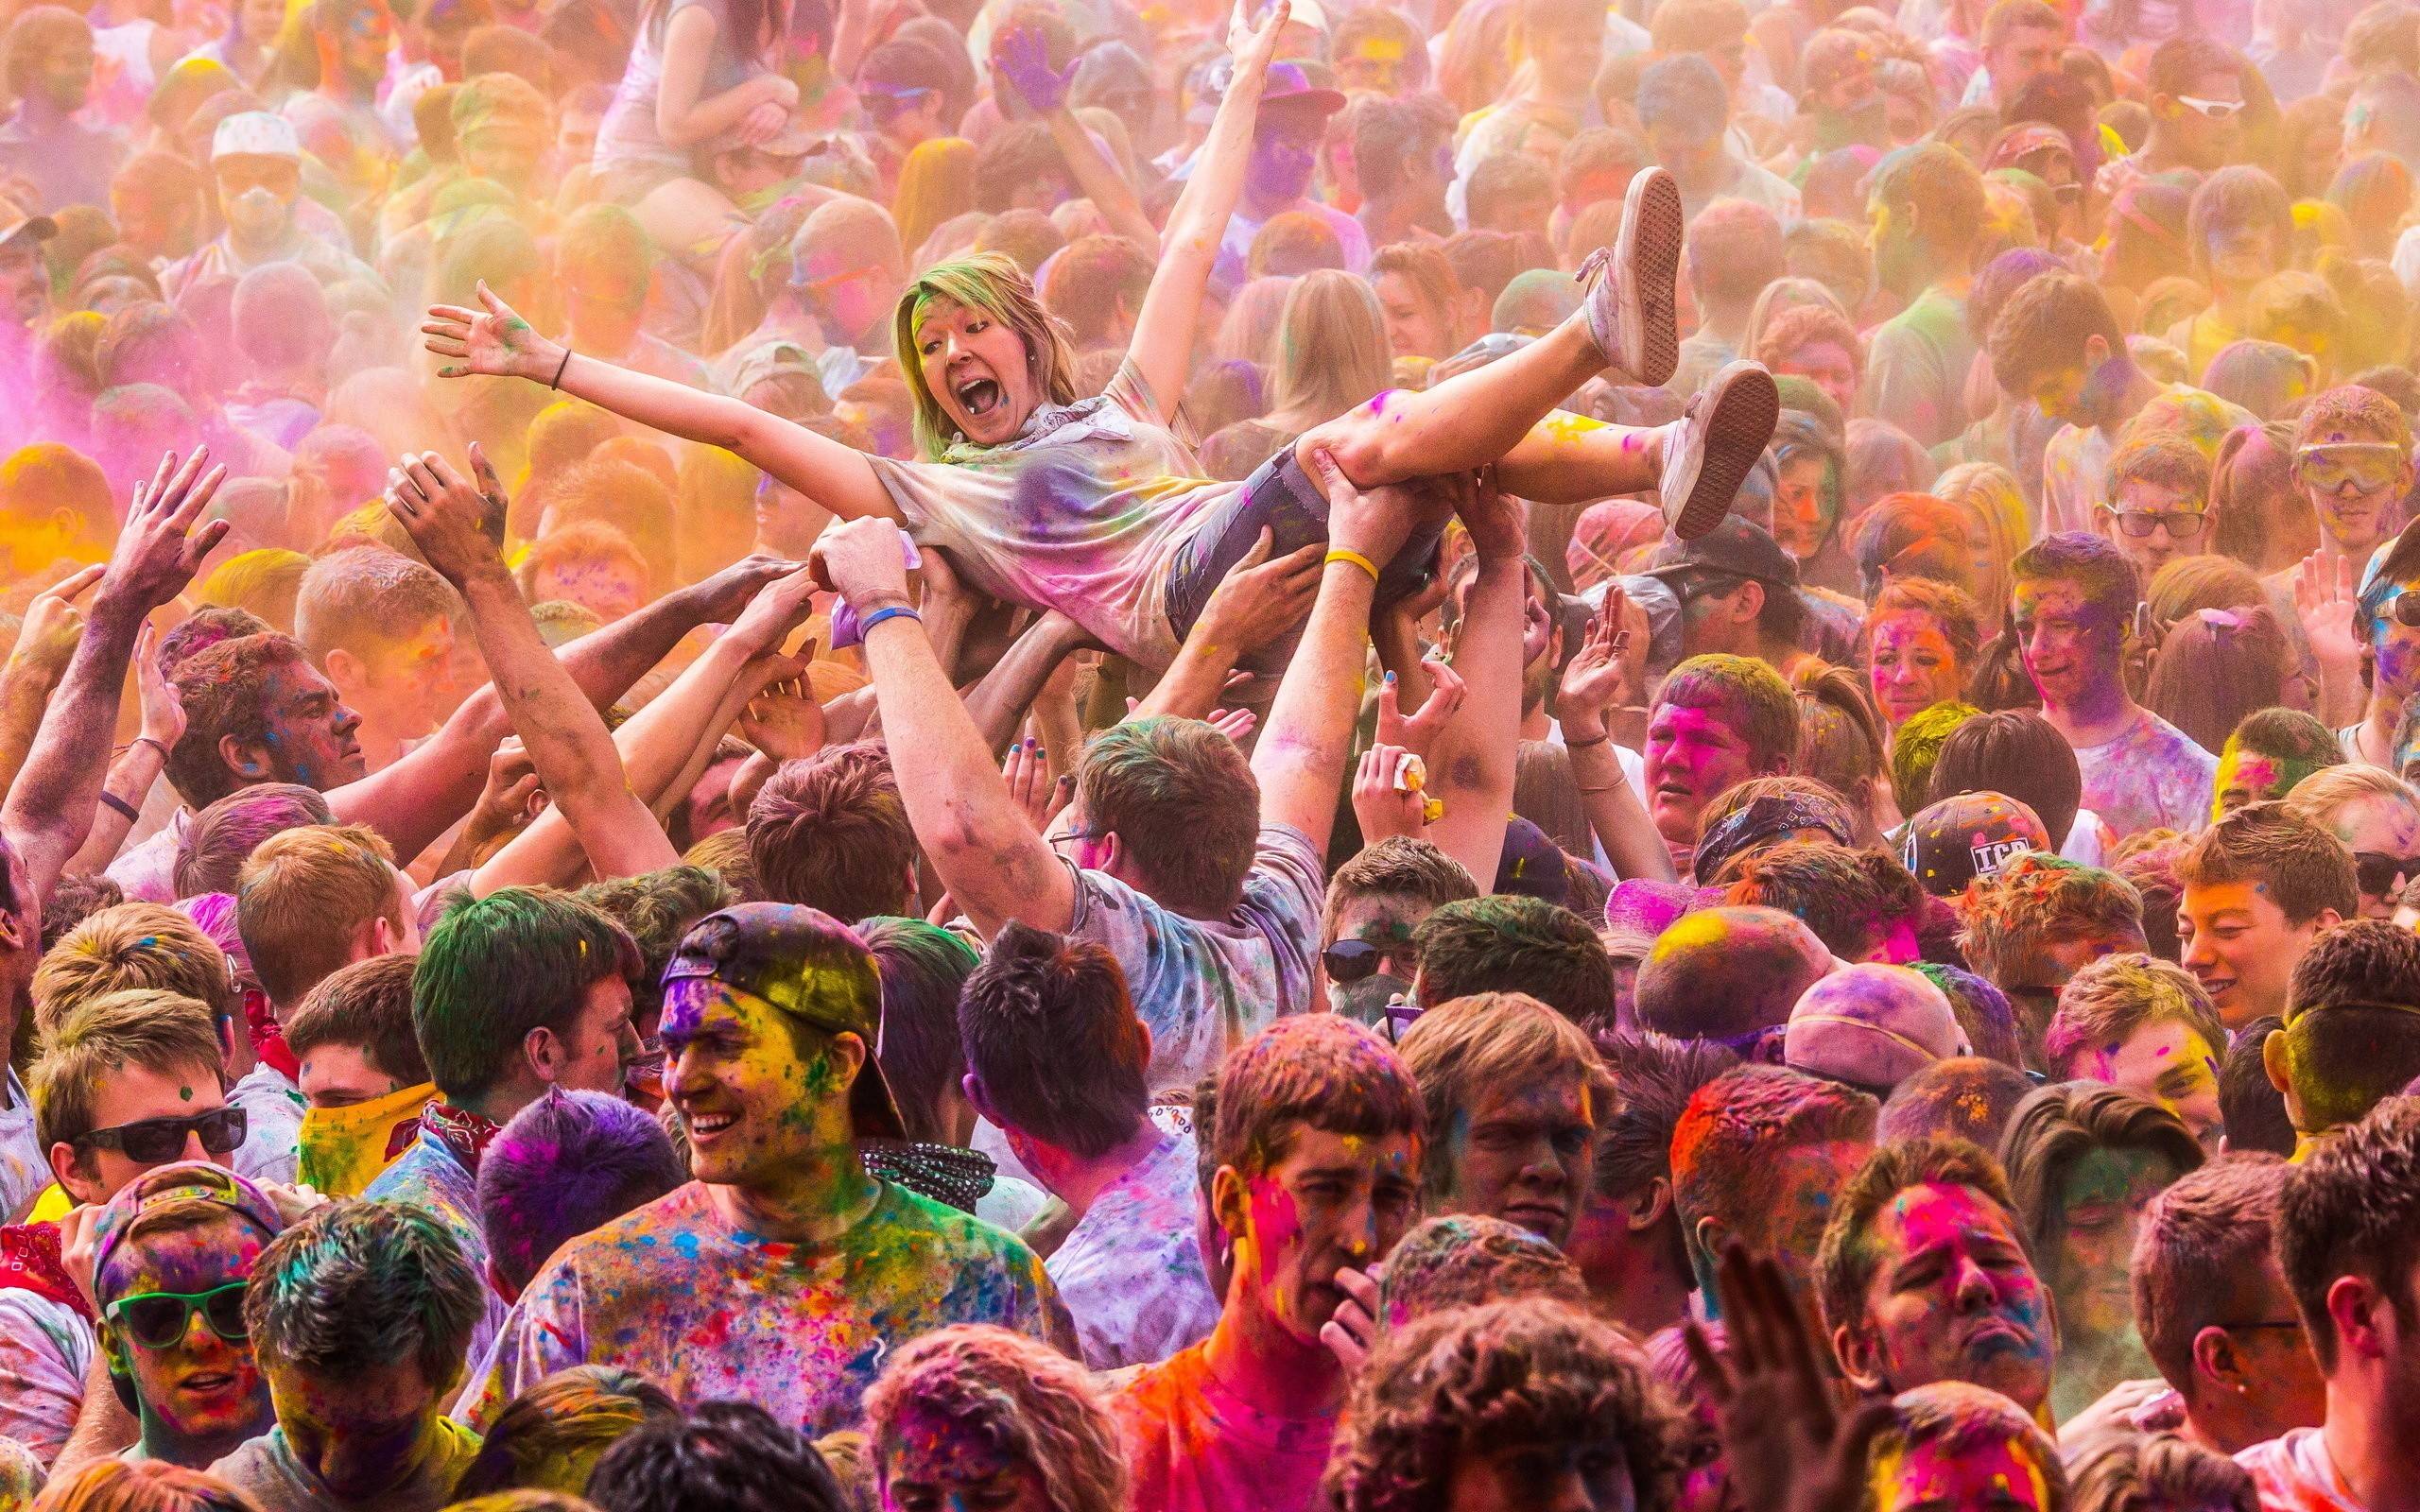 Free Crowd Surfing Day Glow Wallpaper, Free Crowd Surfing Day